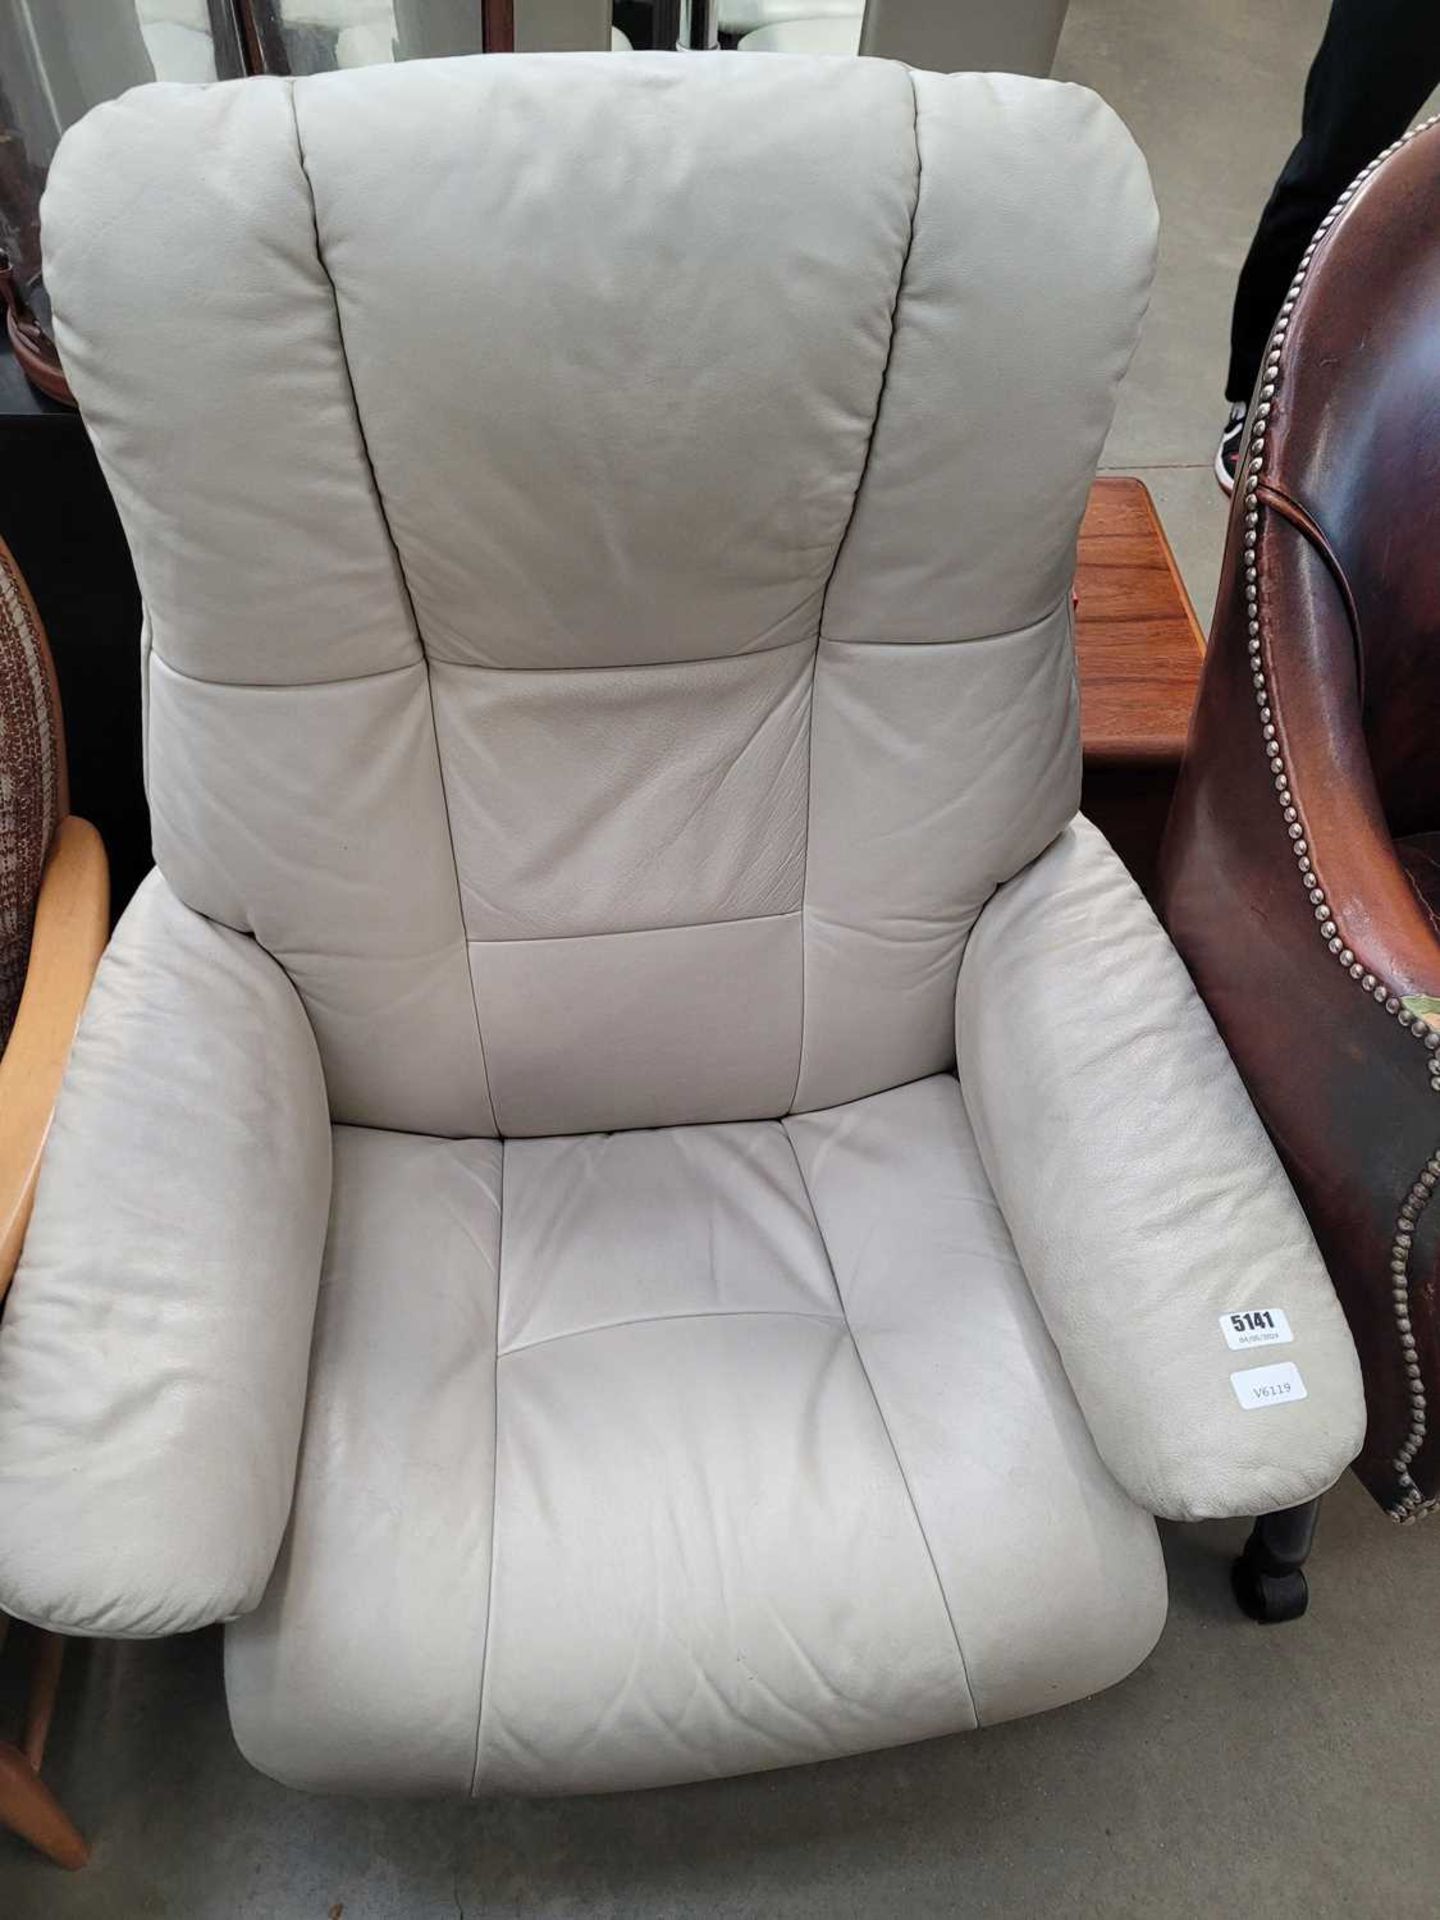 Stressless style swivel armchair with matching footstool - Image 4 of 4